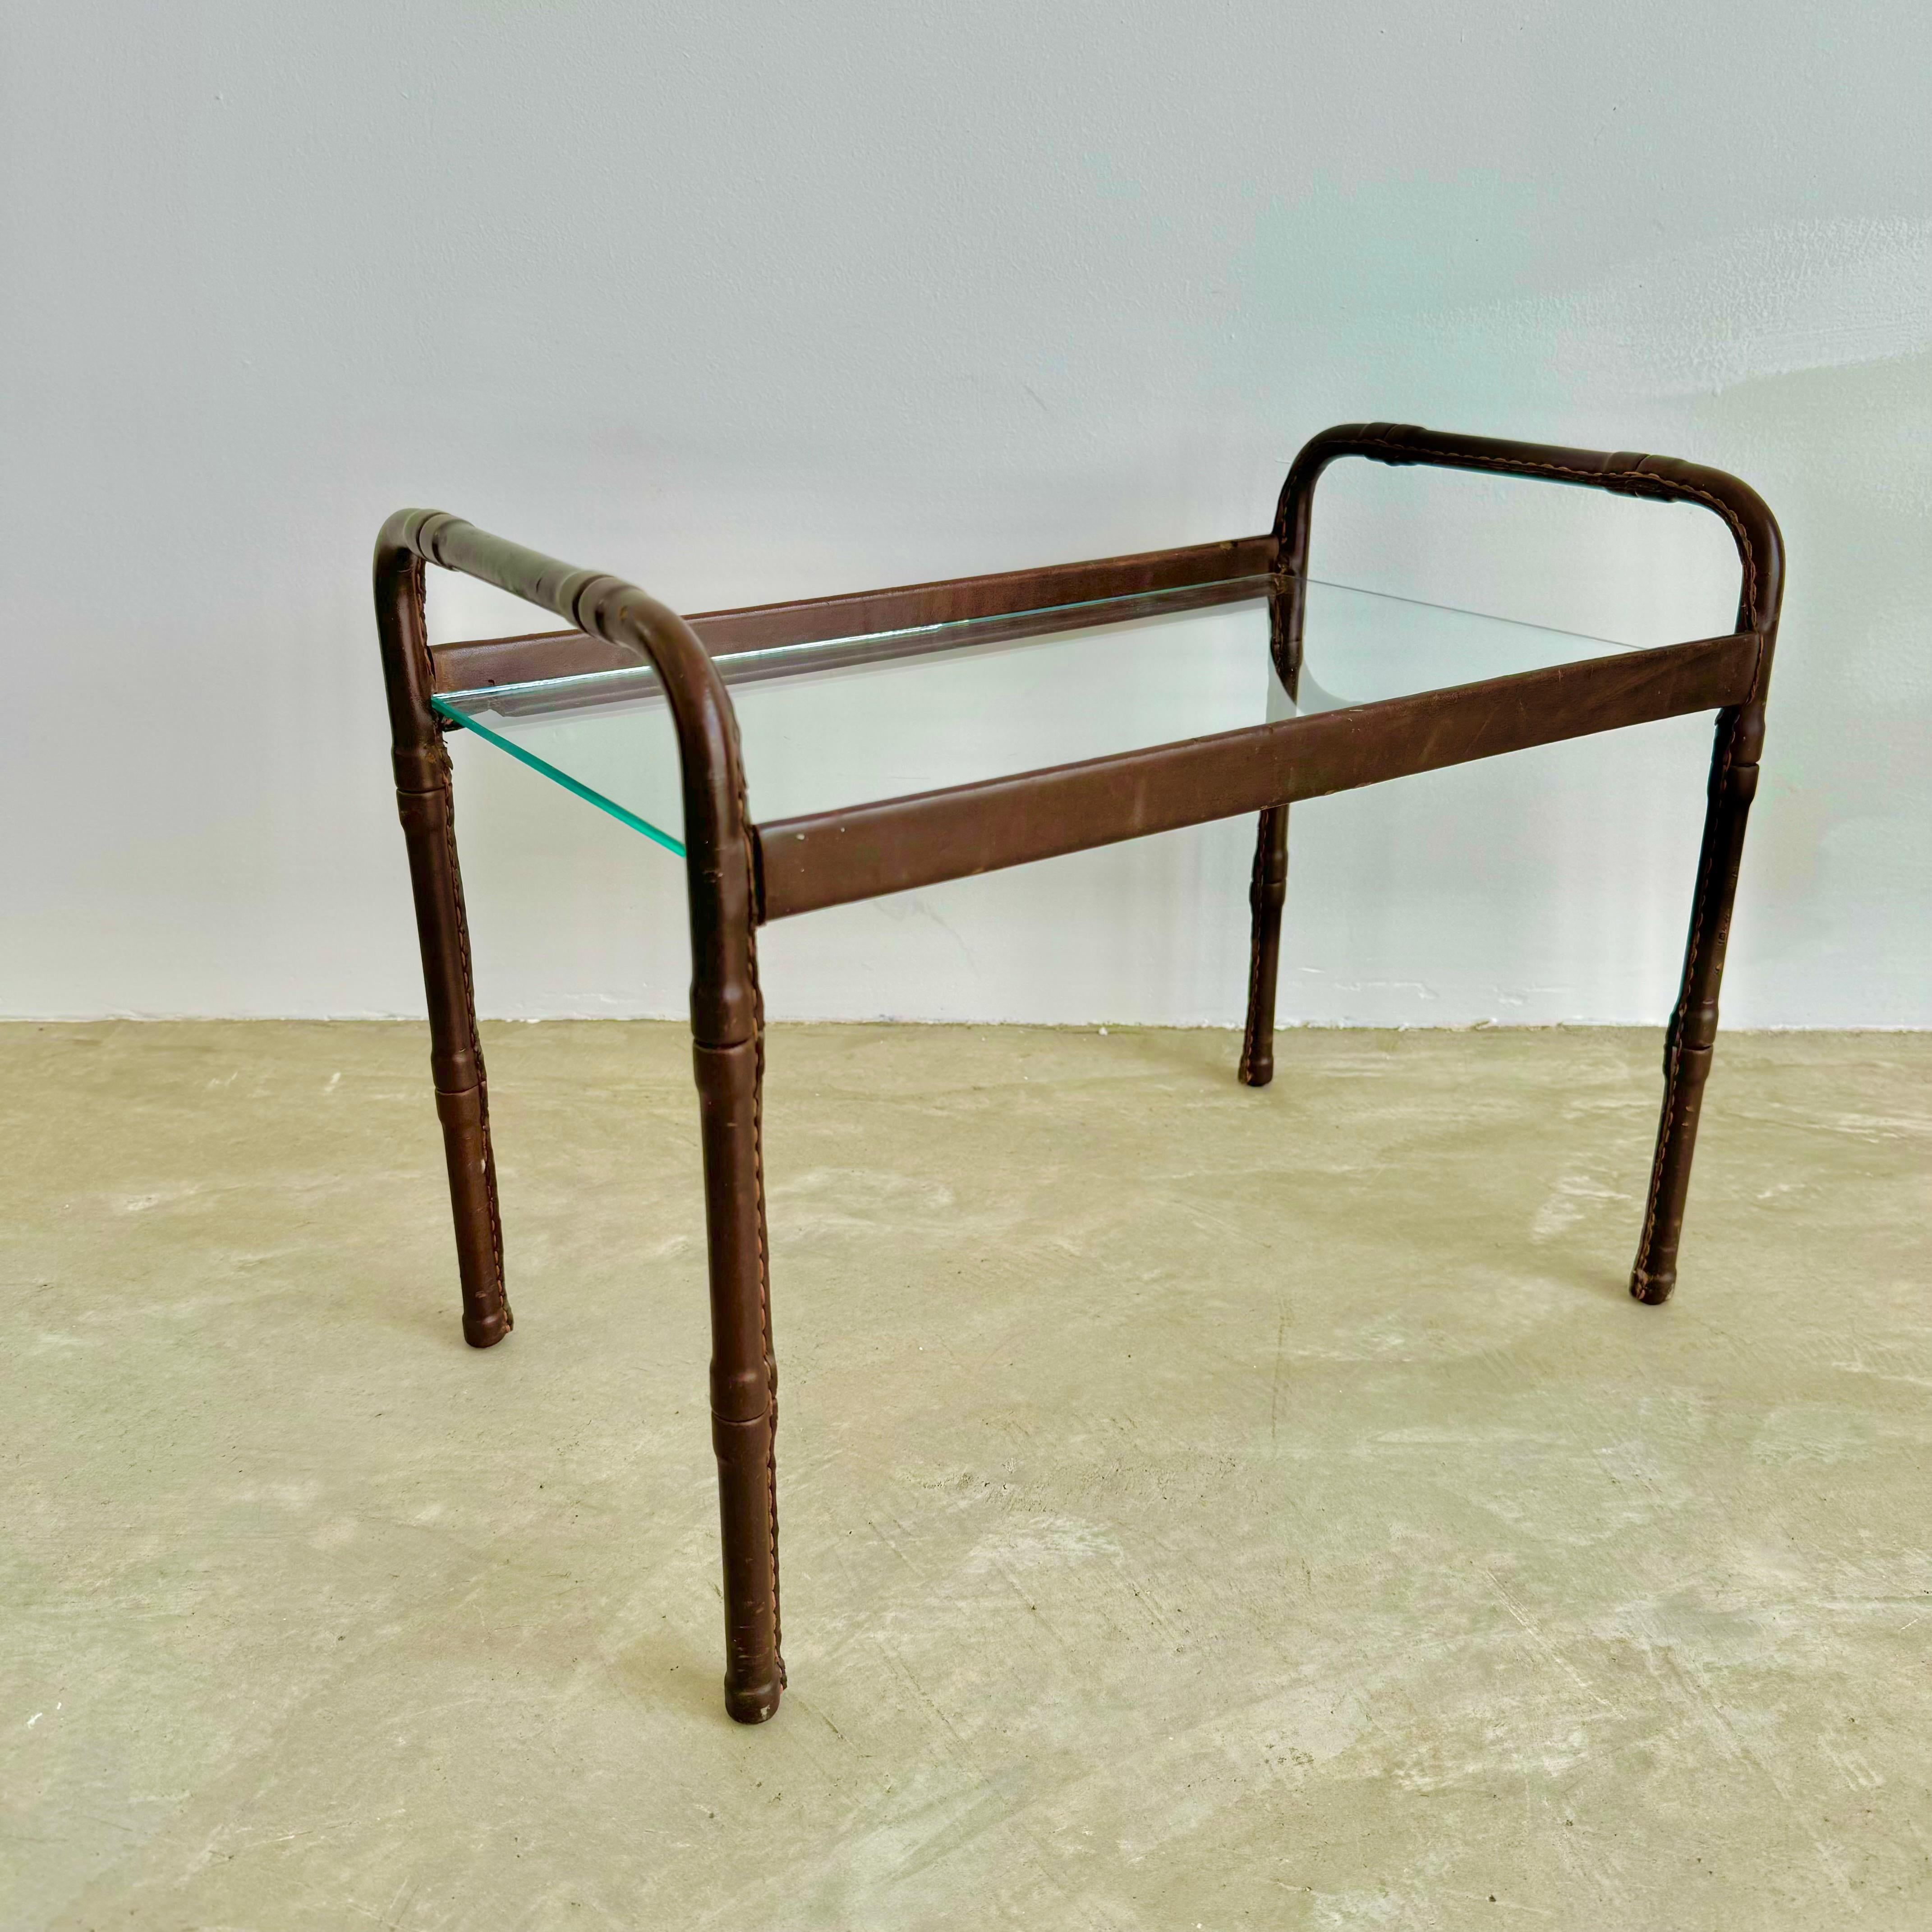 Jacques Adnet Leather and Glass Side Table, 1950s France For Sale 2